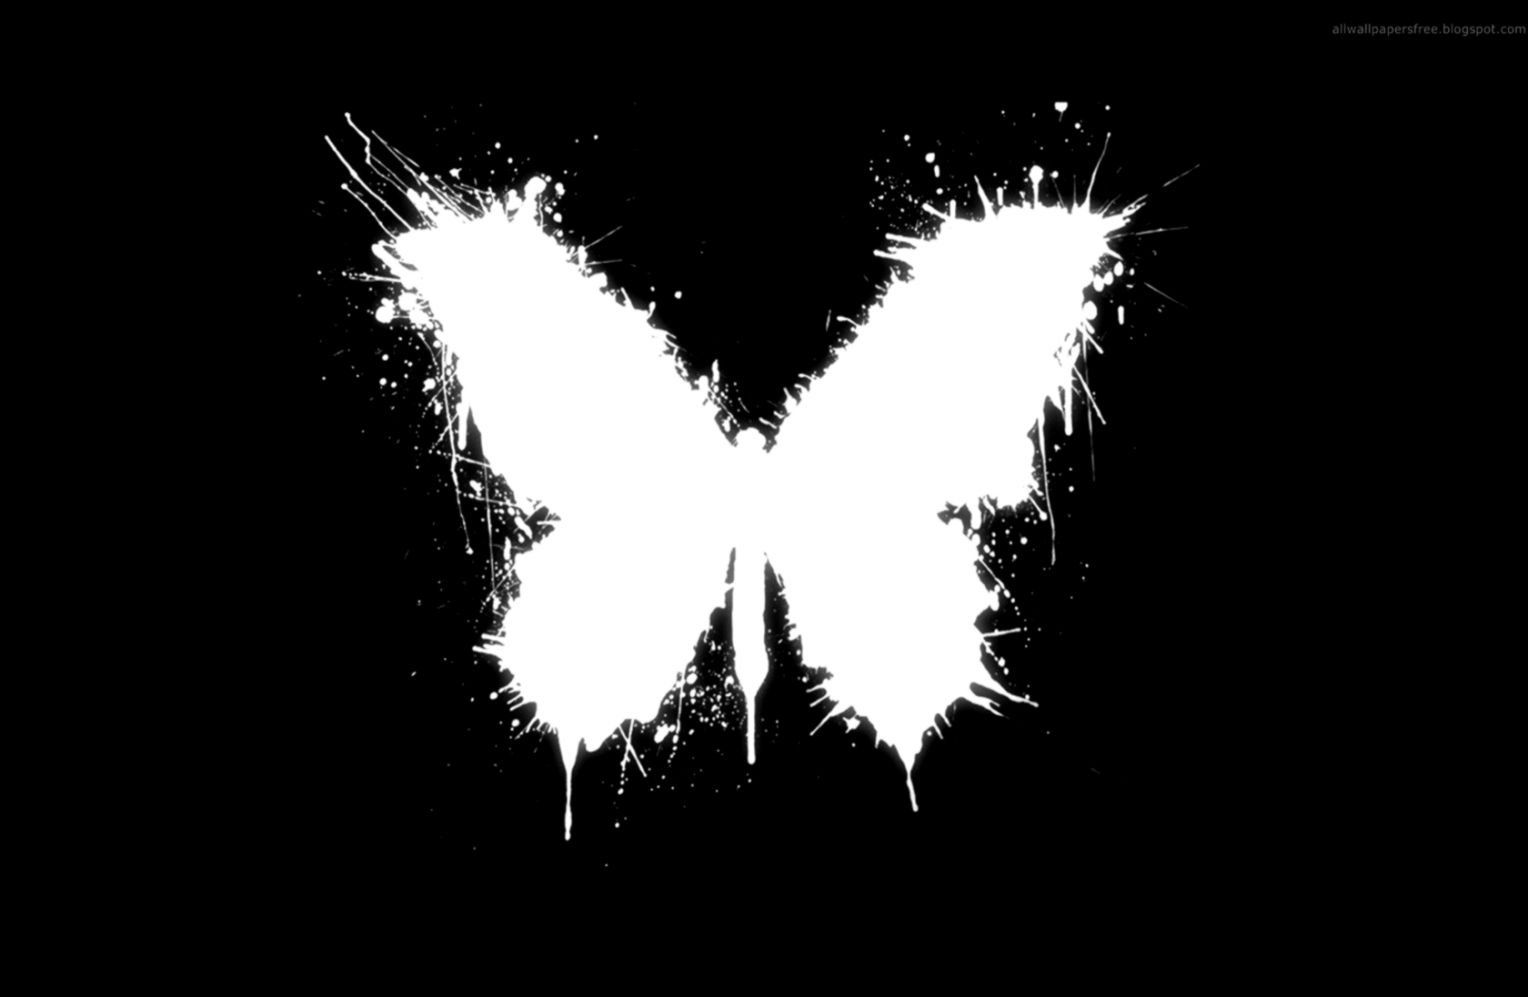 Butterfly Black And White Wallpapers